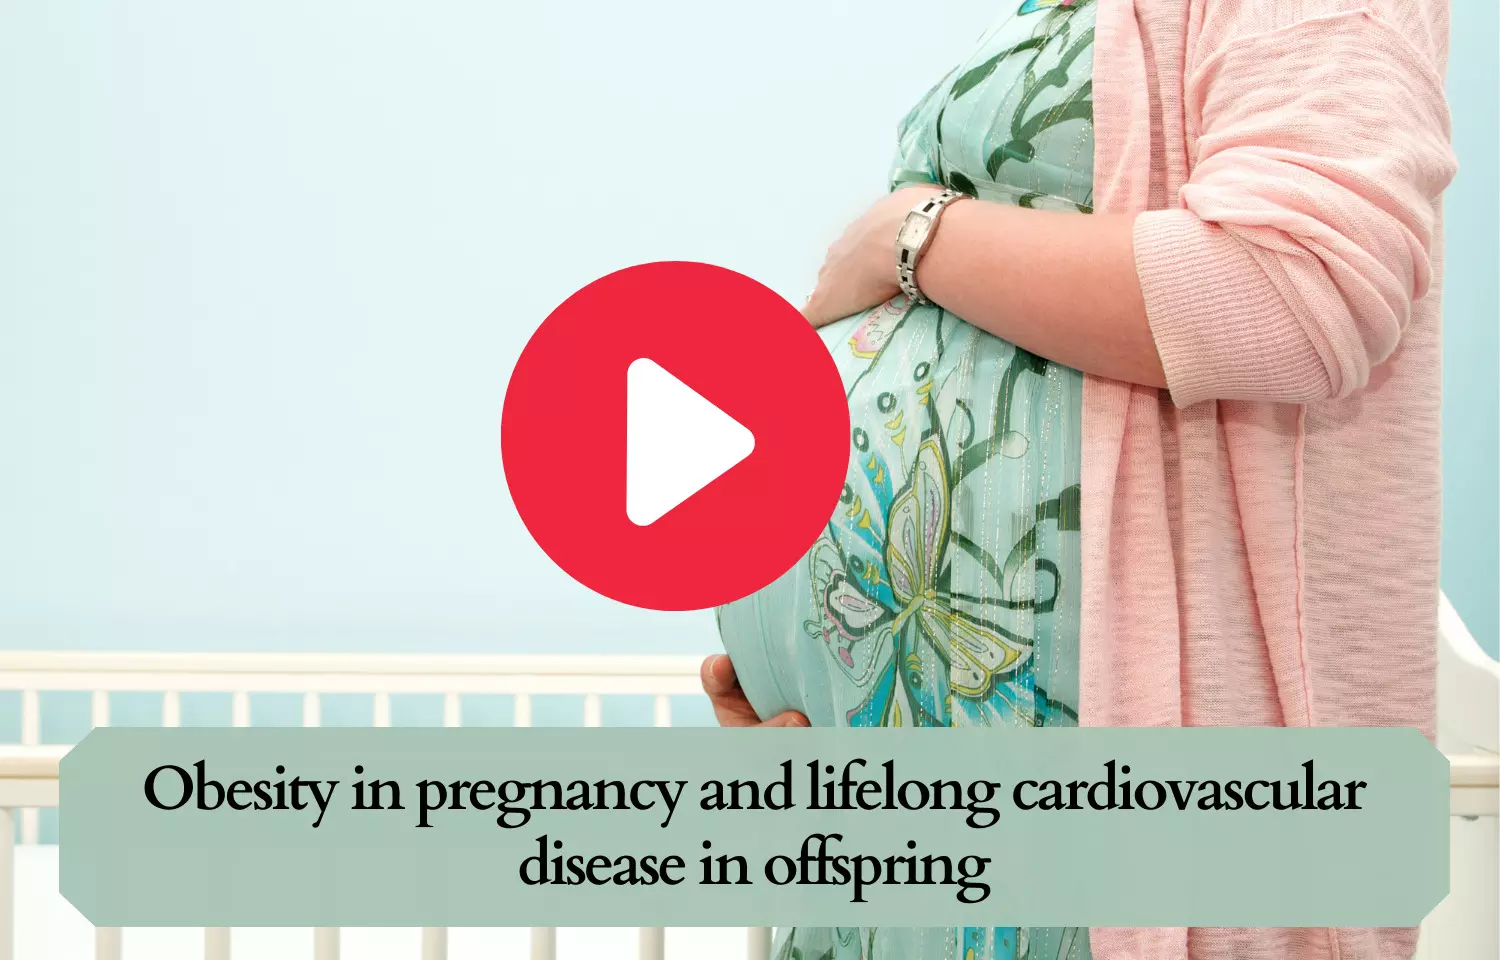 Obesity during pregnancy to cause lifelong cardiovascular disease in offspring